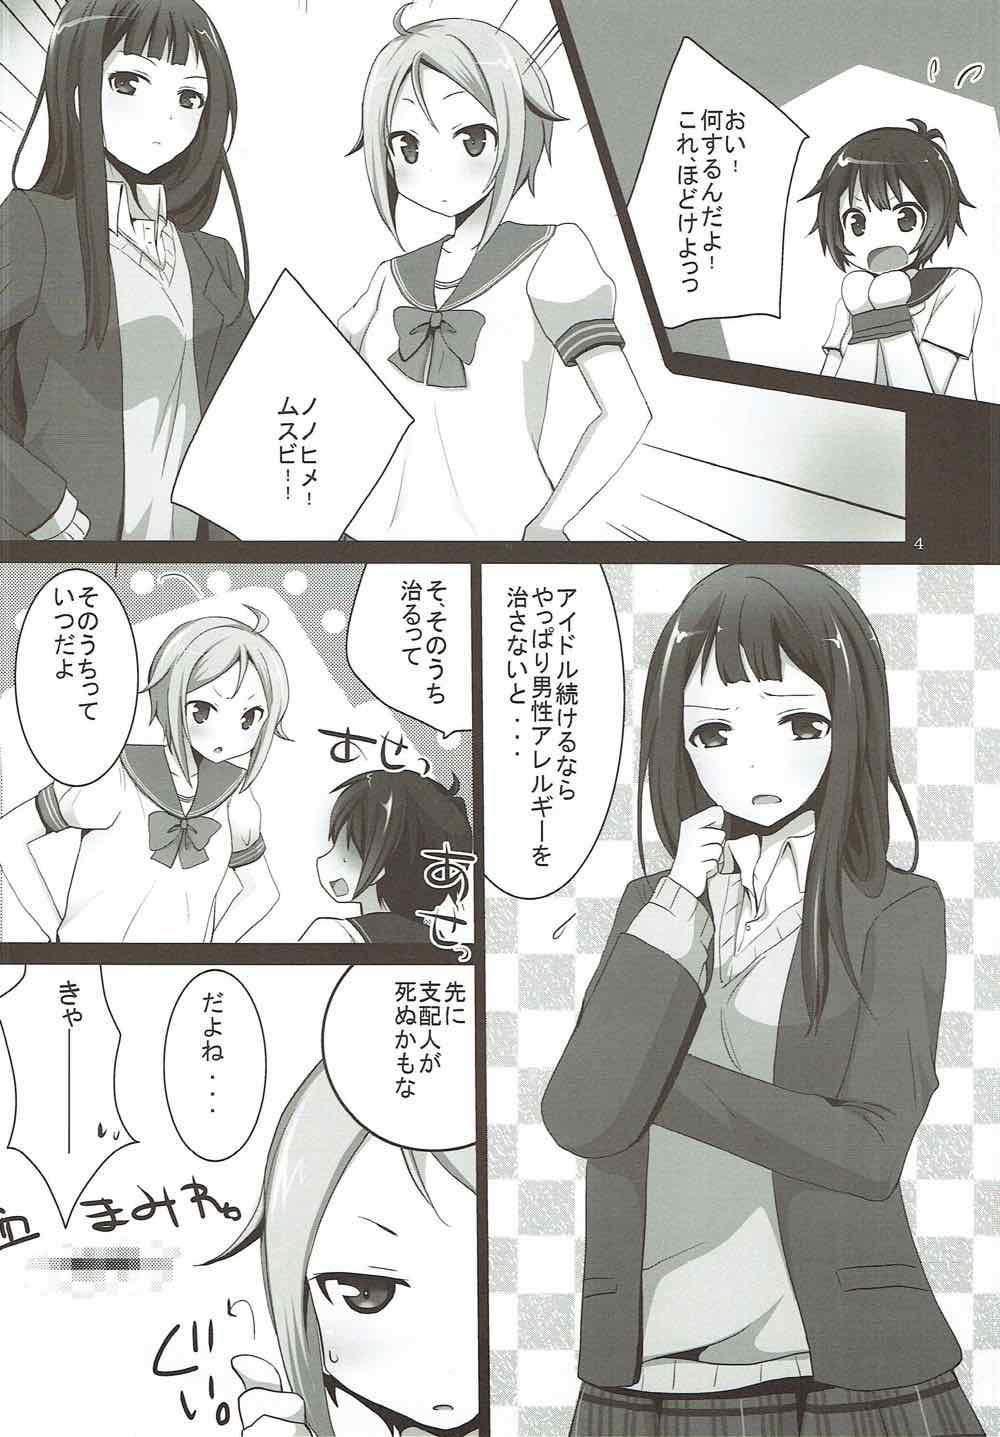 Kitchen The world which laughs, hello. - Tokyo 7th sisters First Time - Page 3